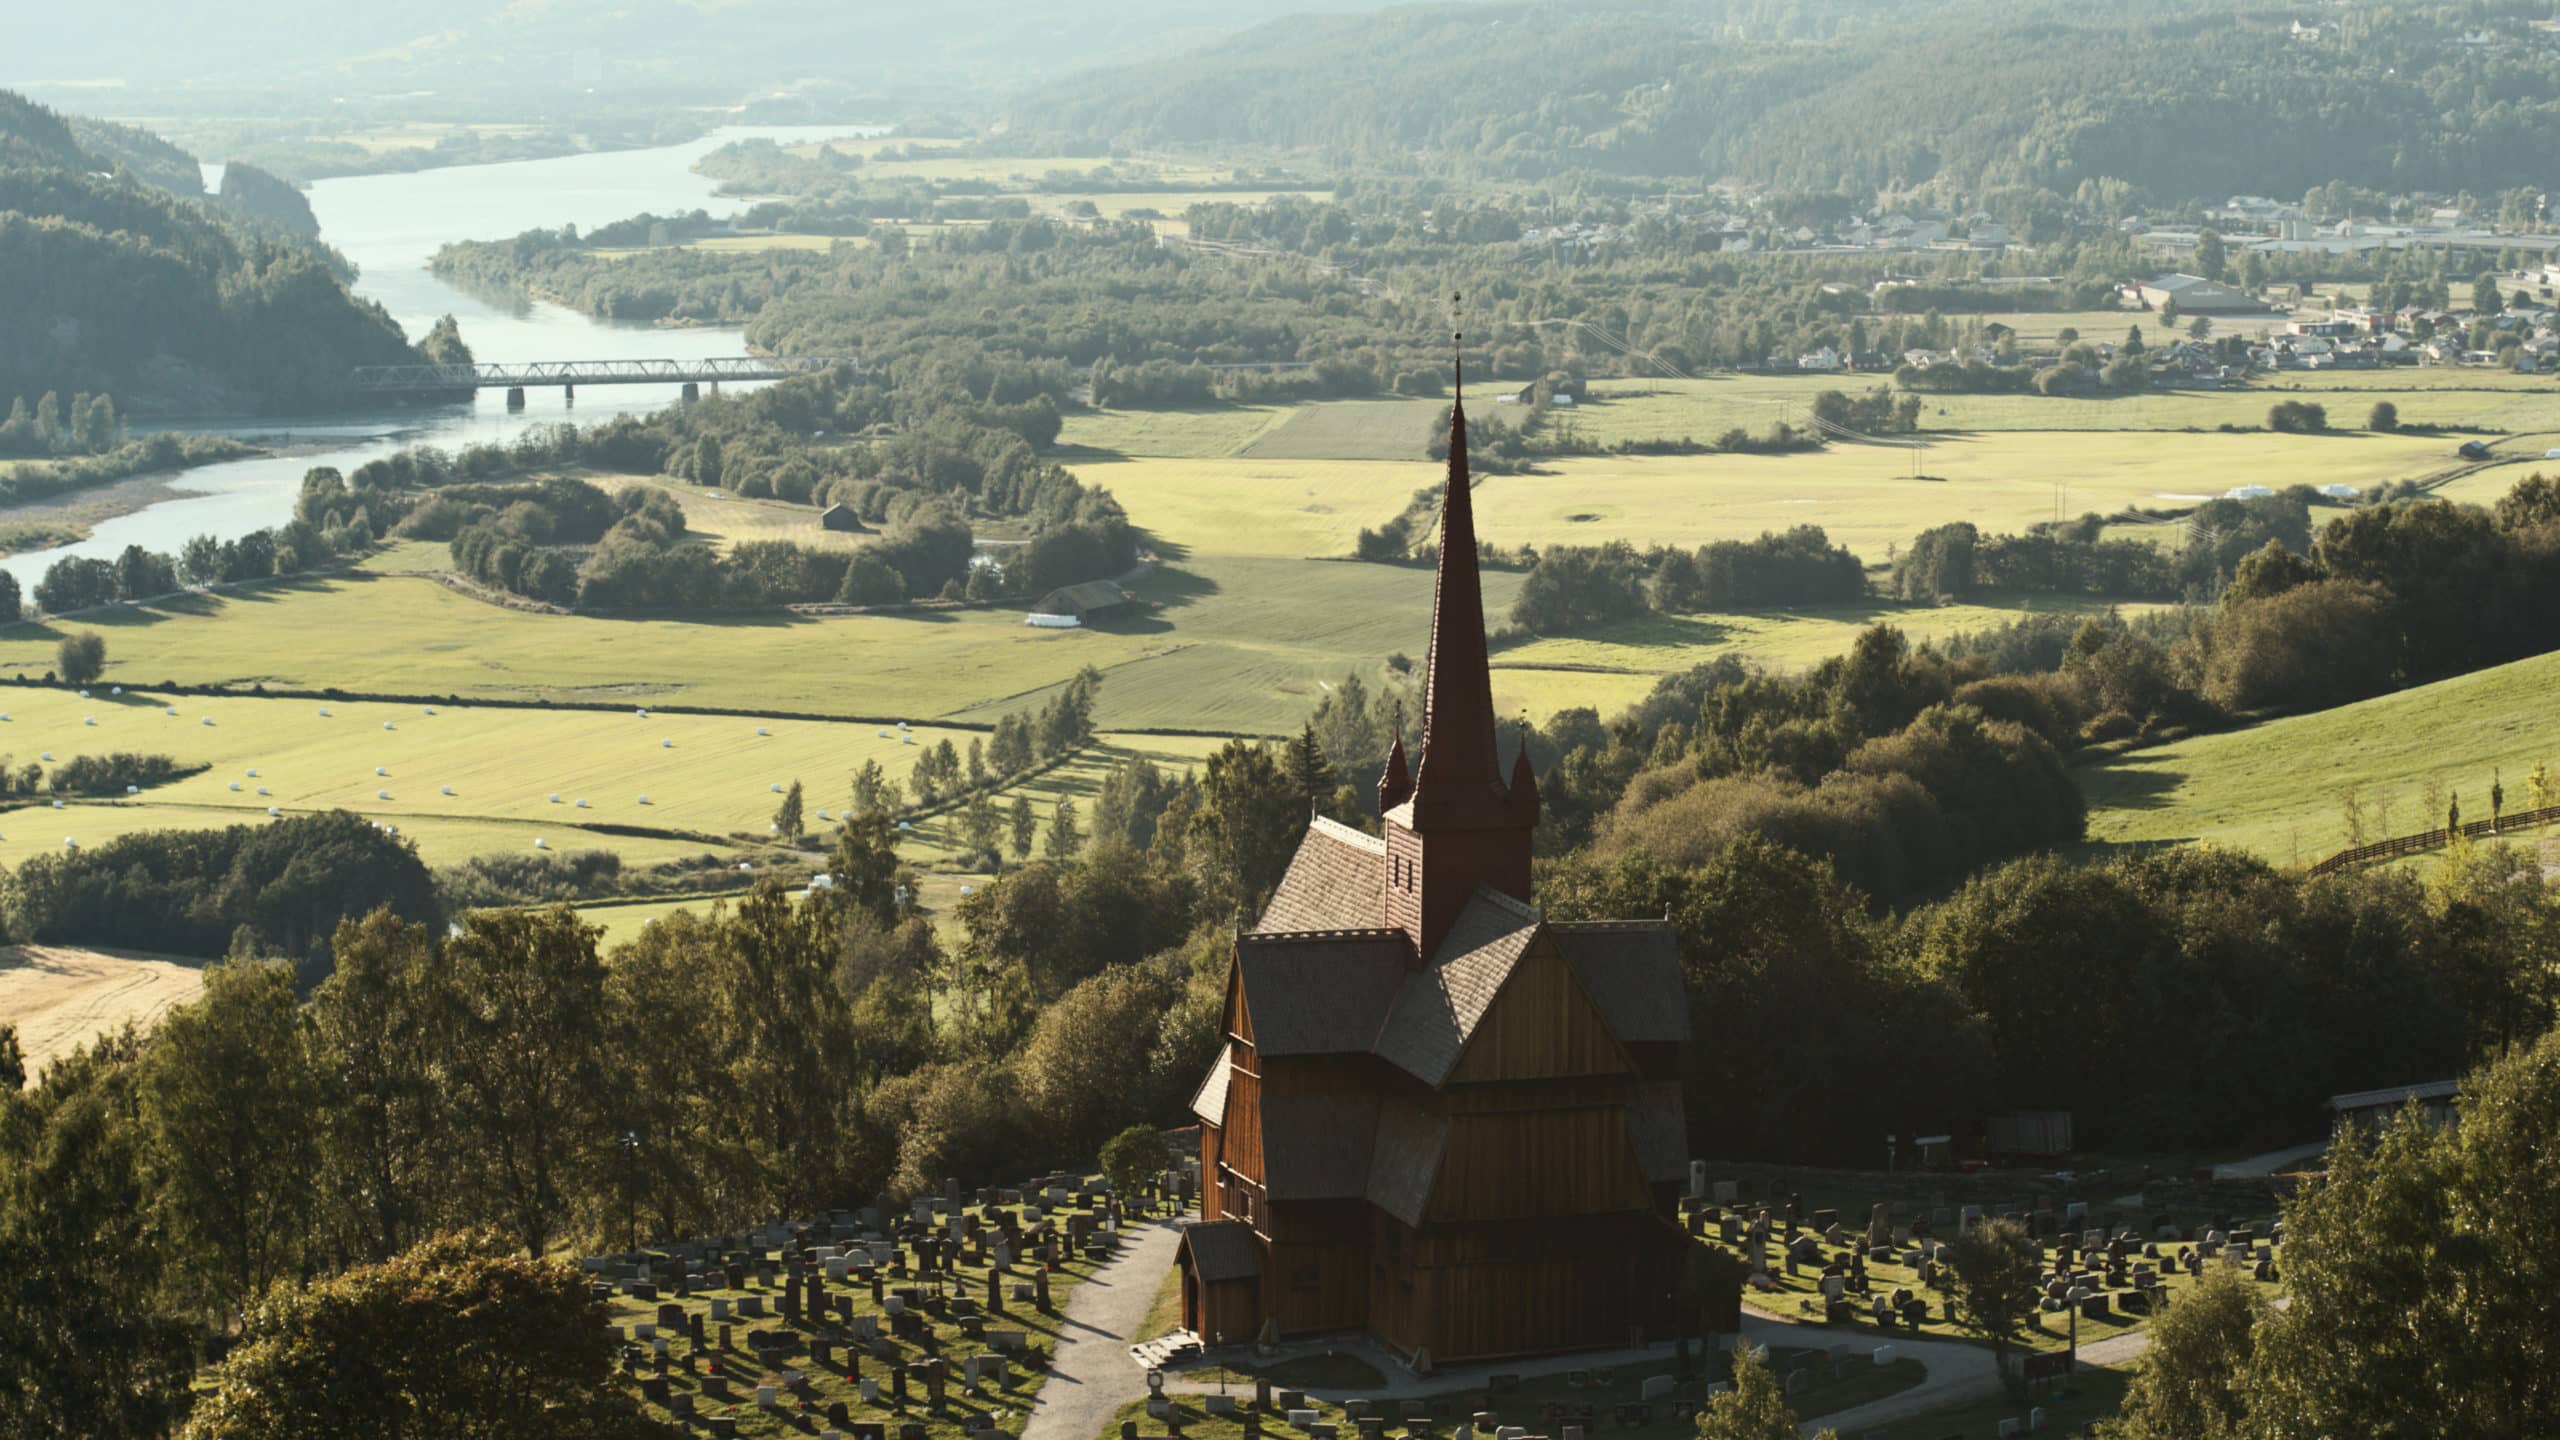 The stave church of Ringebu surrounded by fields and trees and a river flowing.